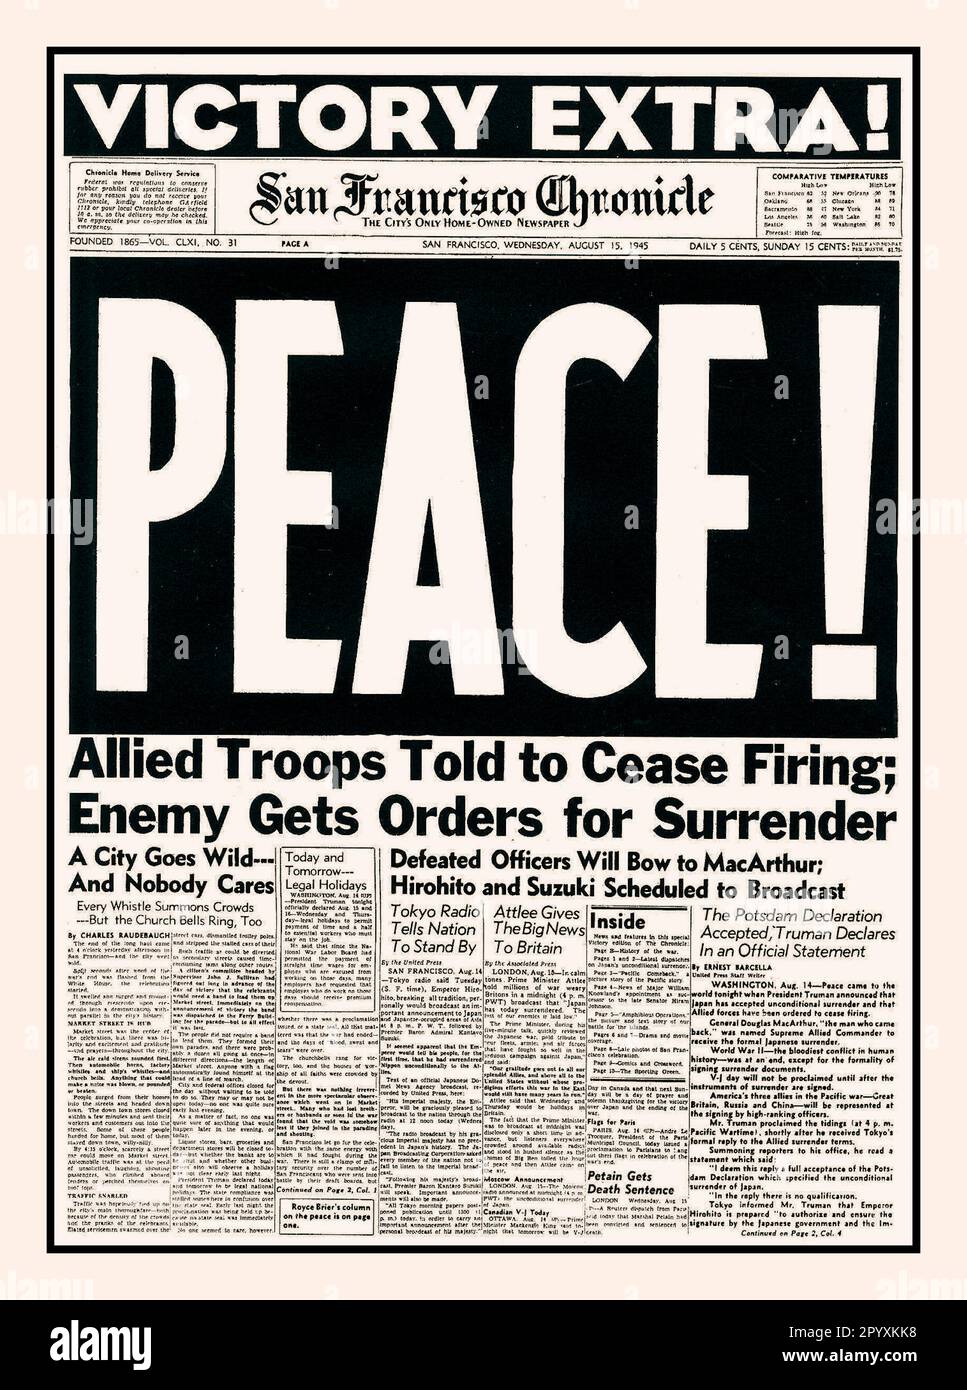 VJ DAY WW2 PEACE ! Japan surrenders Newpaper headline San Francisco Chronicle. AUG.15th 1945 End of World War II Second World War Japan surrenders. V-J Day, or Victory over Japan Day, marks the end of World War II, one of the deadliest and most destructive wars in history. When President Harry S. Truman announced on Aug. 14, 1945, that Japan had surrendered unconditionally, war-weary citizens around the world erupted in celebration. Stock Photo